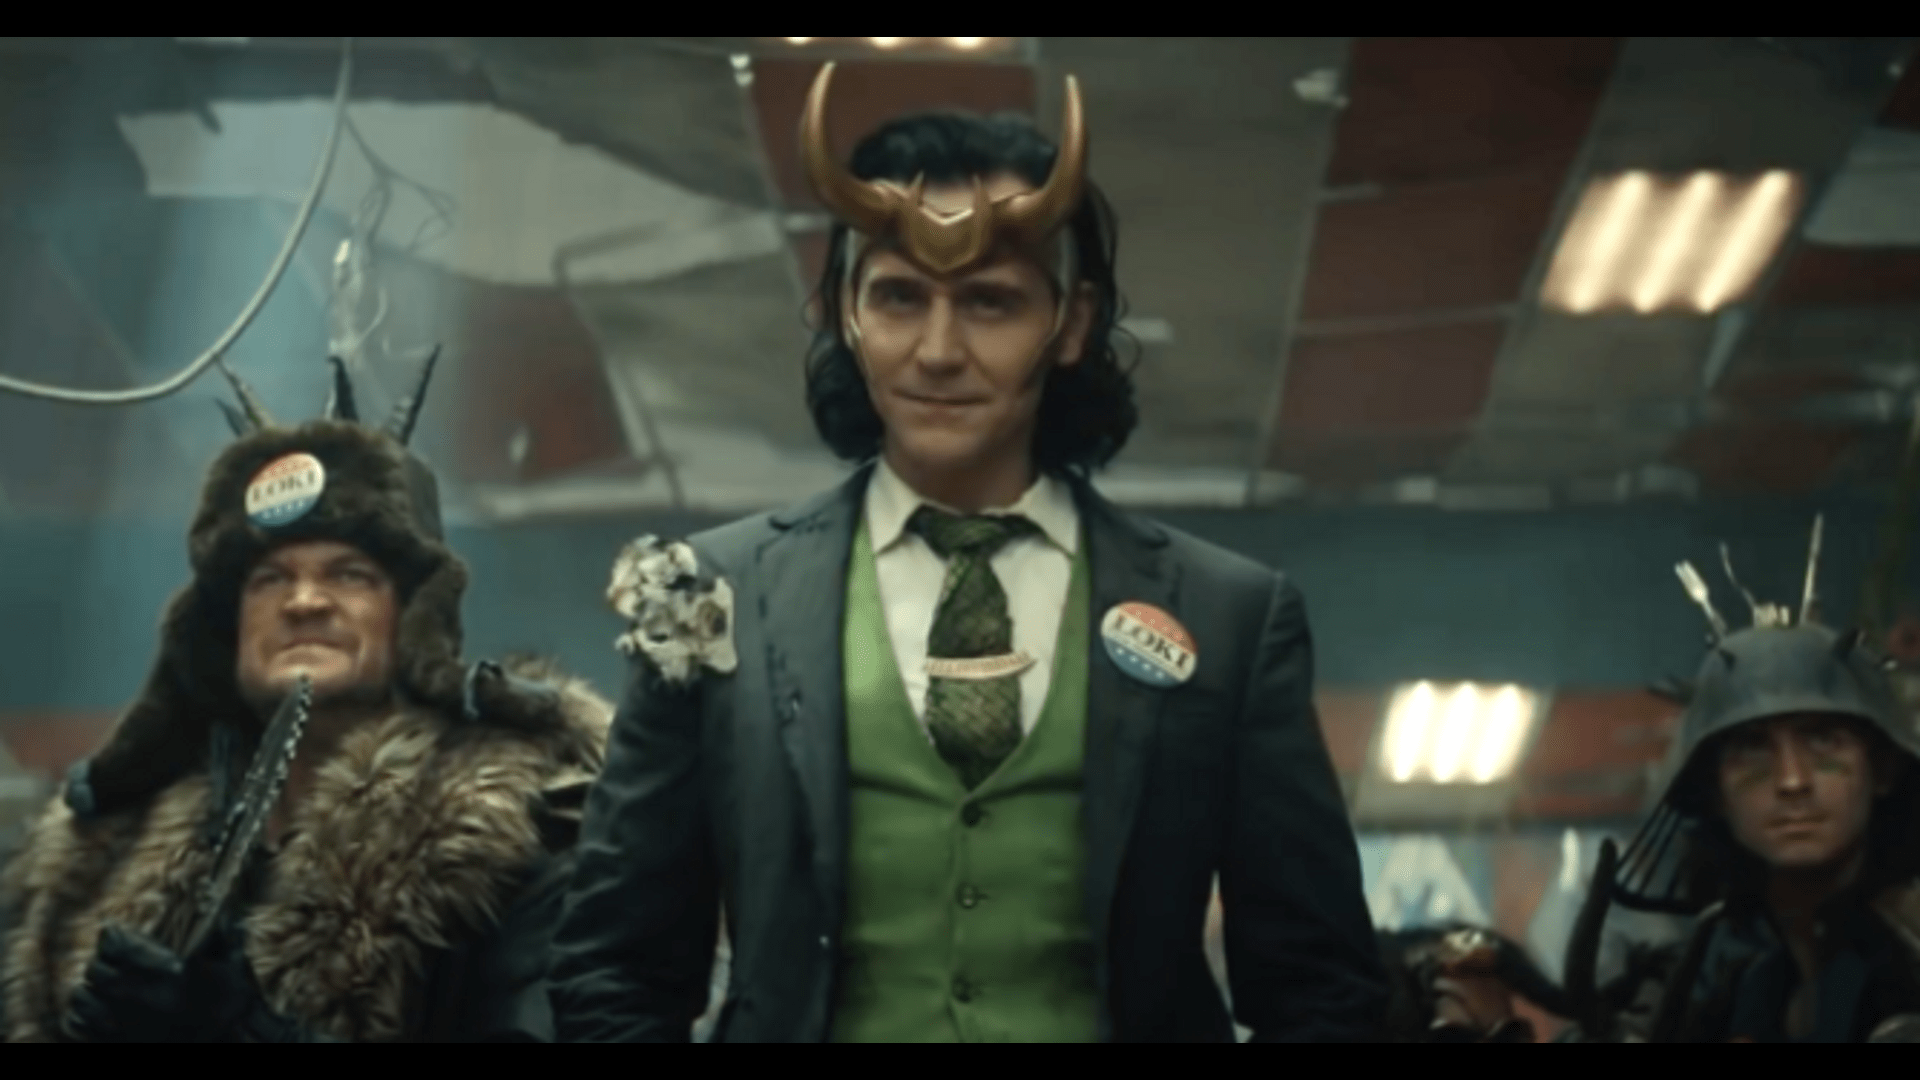 loki-continues-as-the-most-watched-marvel-series-on-disney